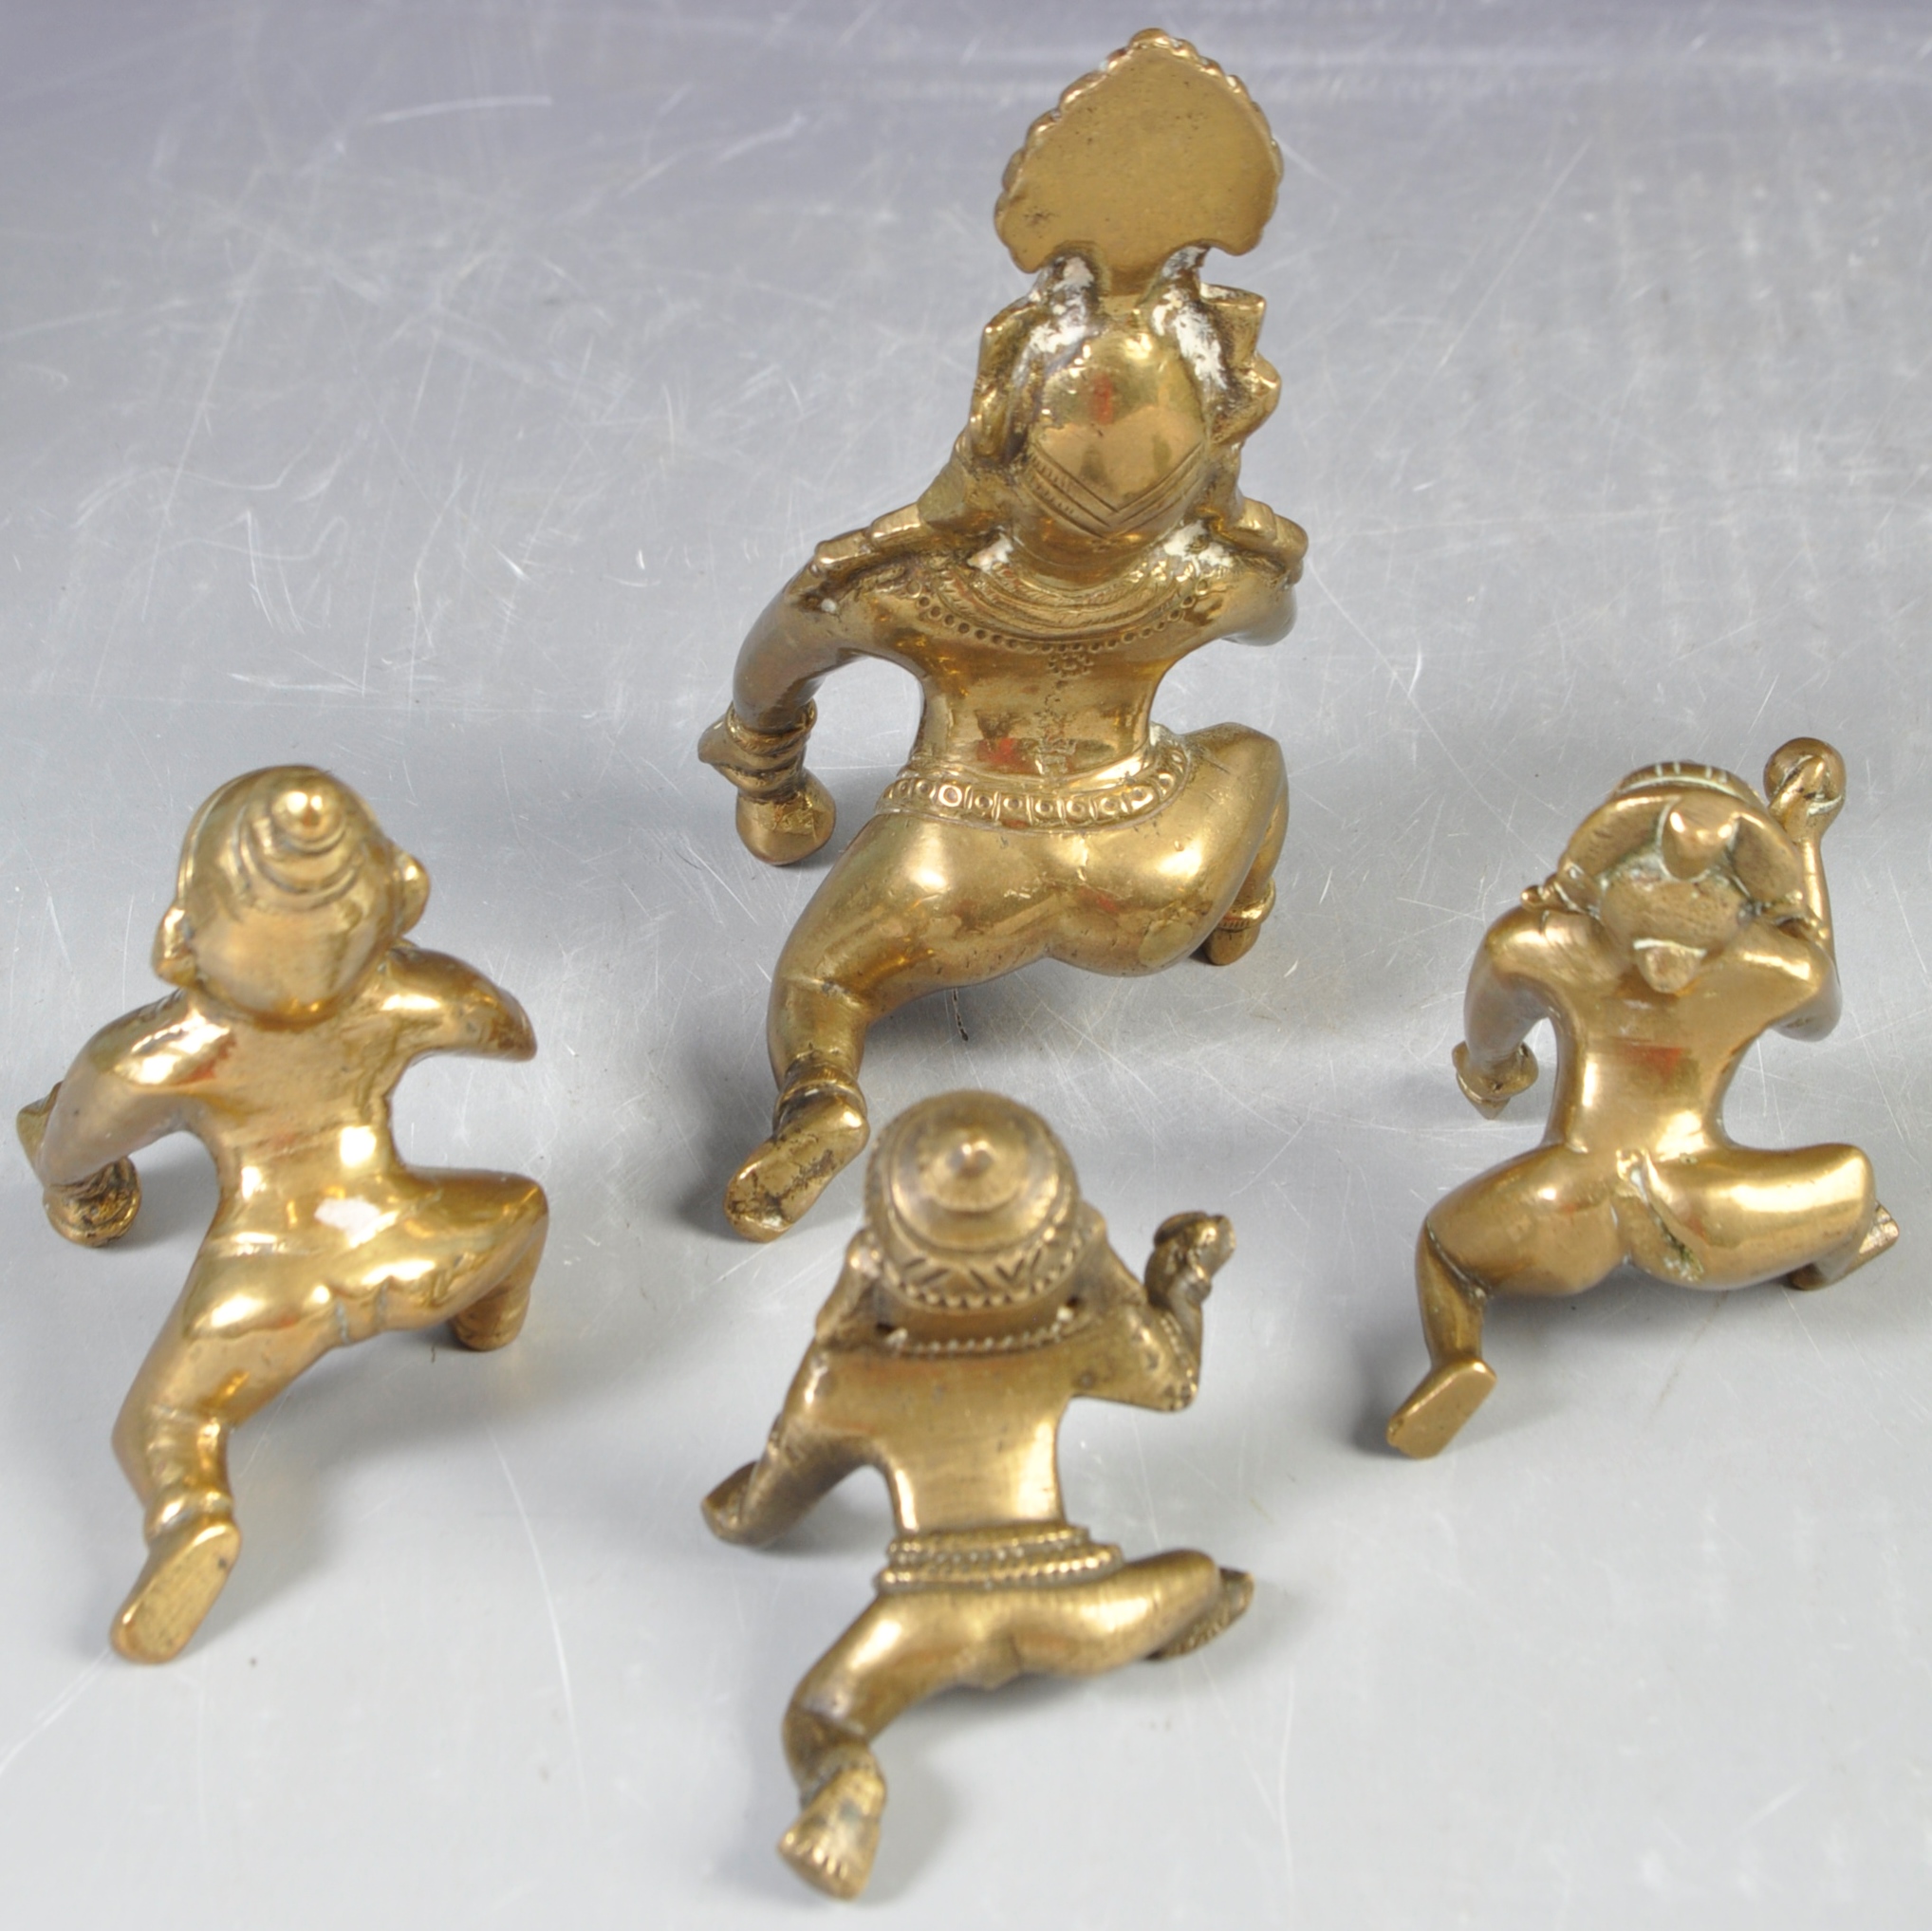 COLLECTION OF ANTIQUE FIGURES OF BOY KRISHNA AND BUTTER BALL - Image 4 of 5